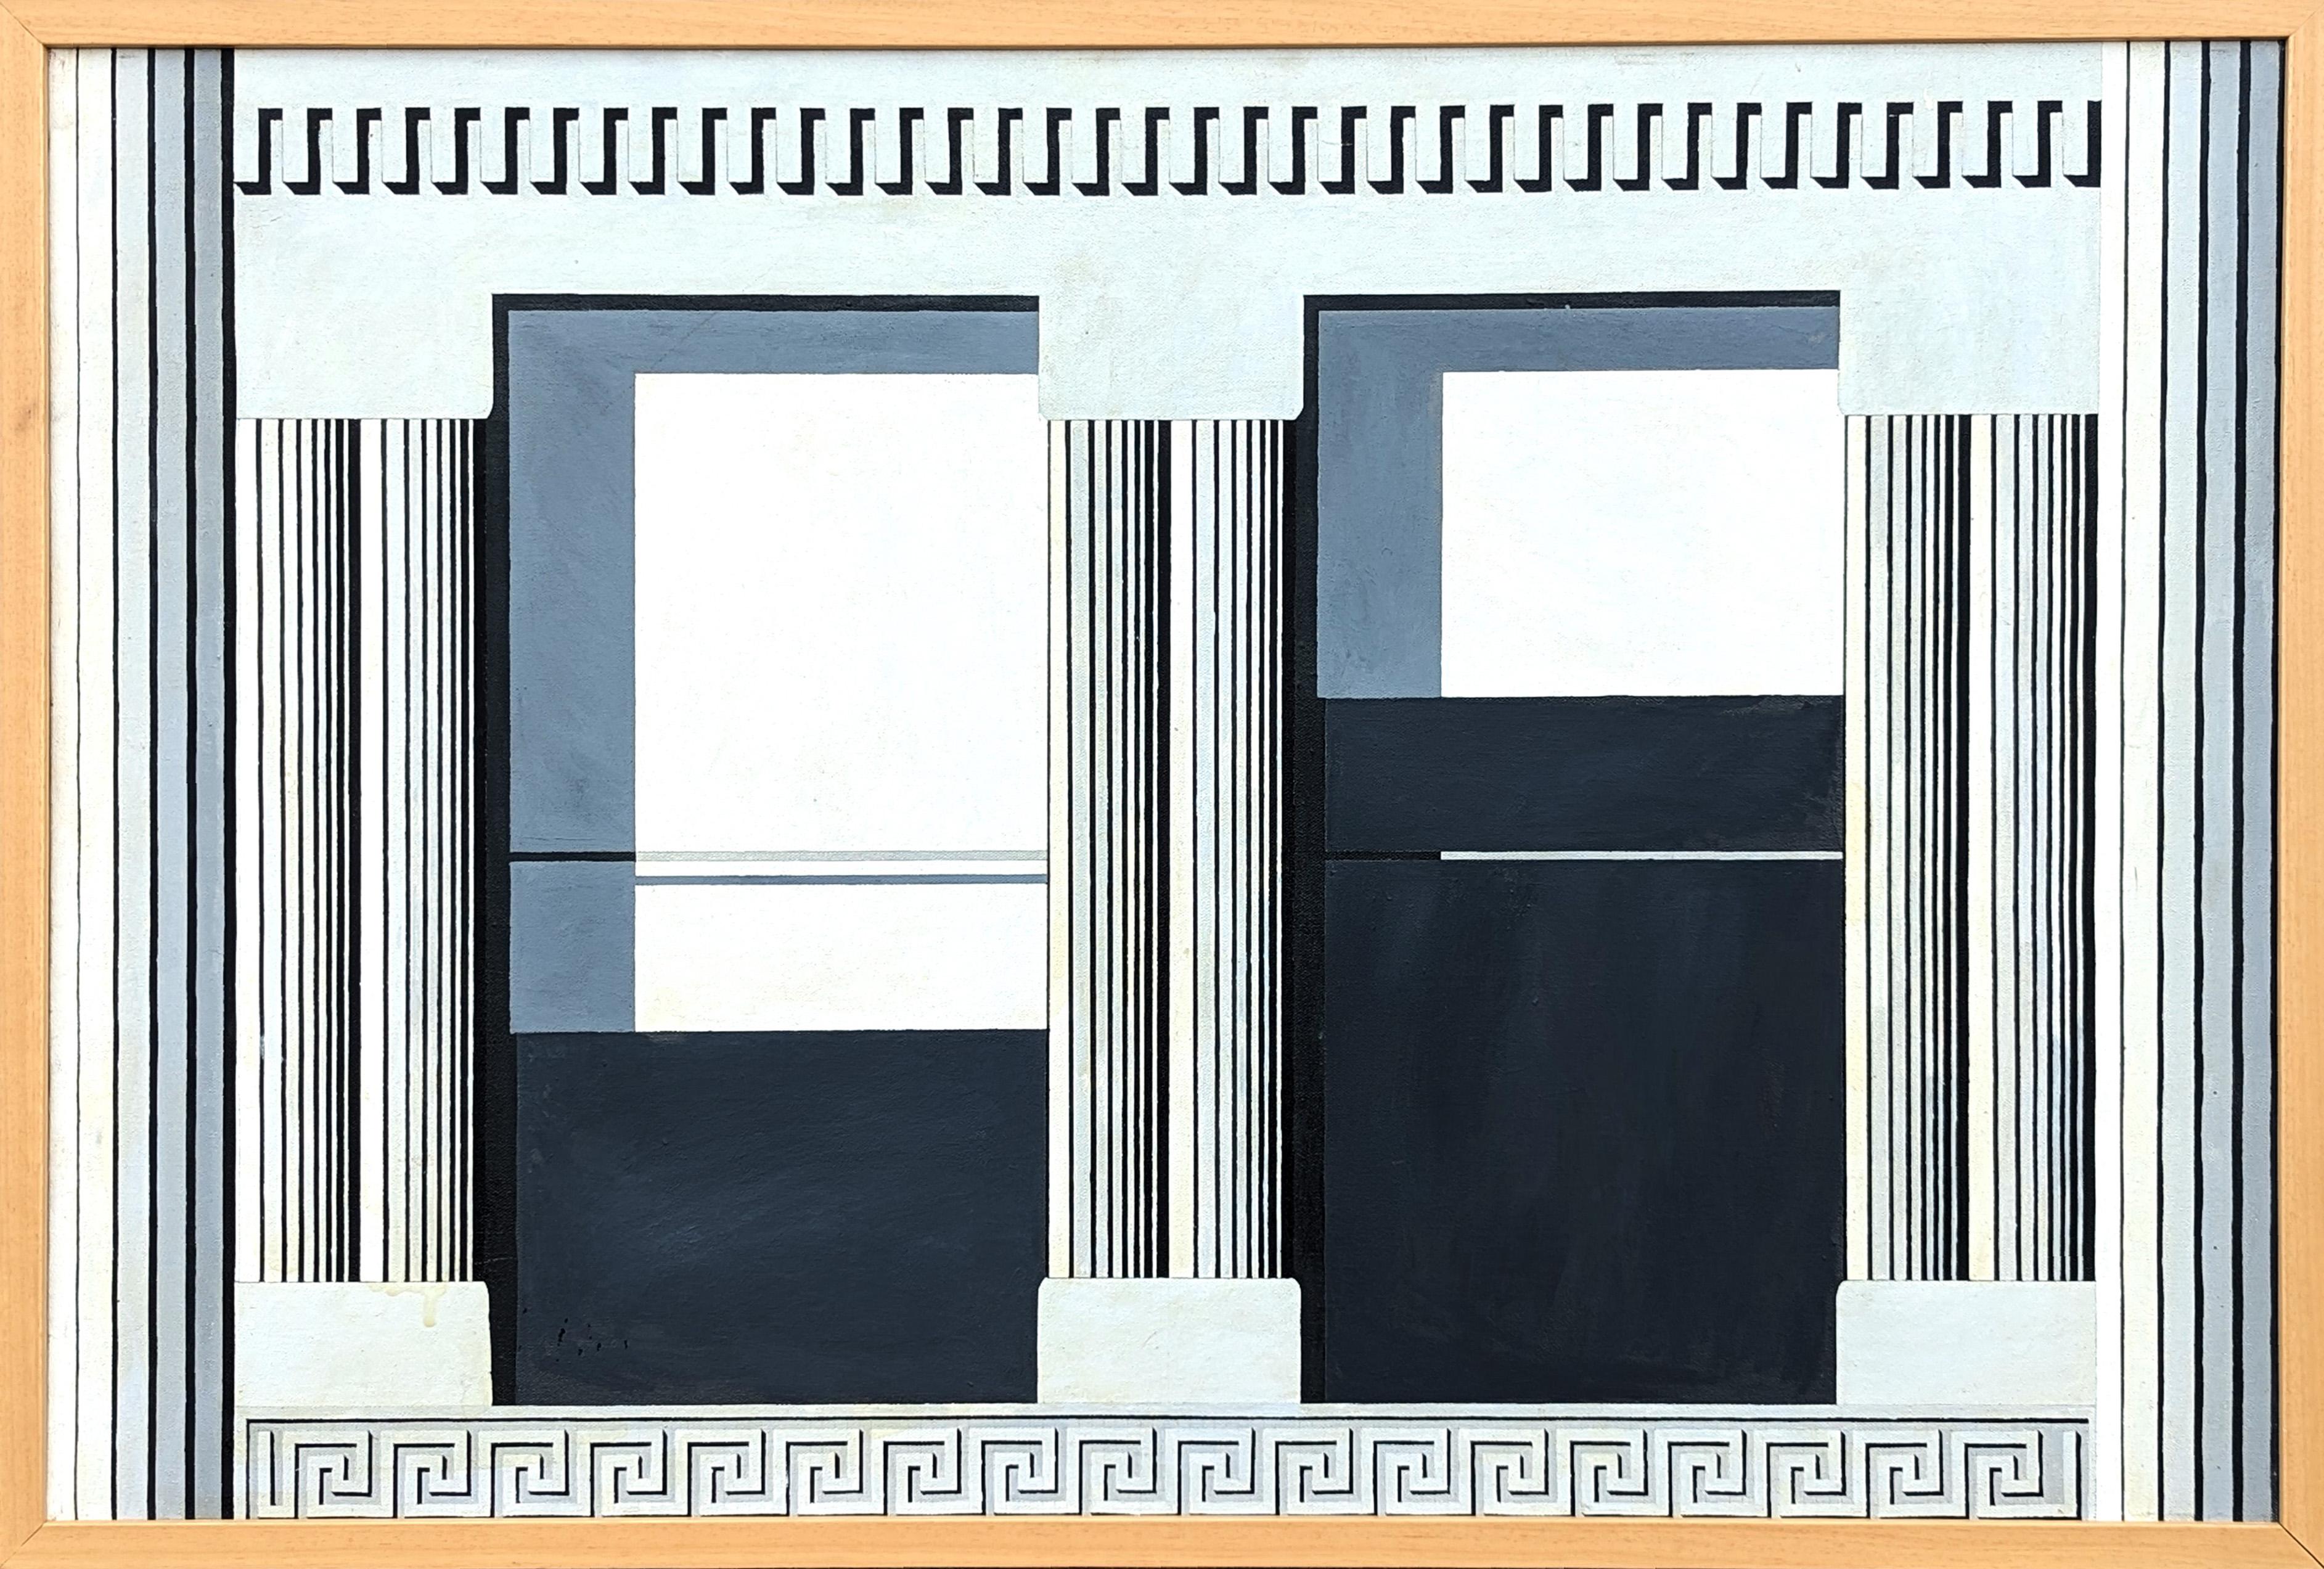 Clark V. Fox Landscape Painting - "Classical Windows" Modern Grey and Black Toned Architectural Façade Painting